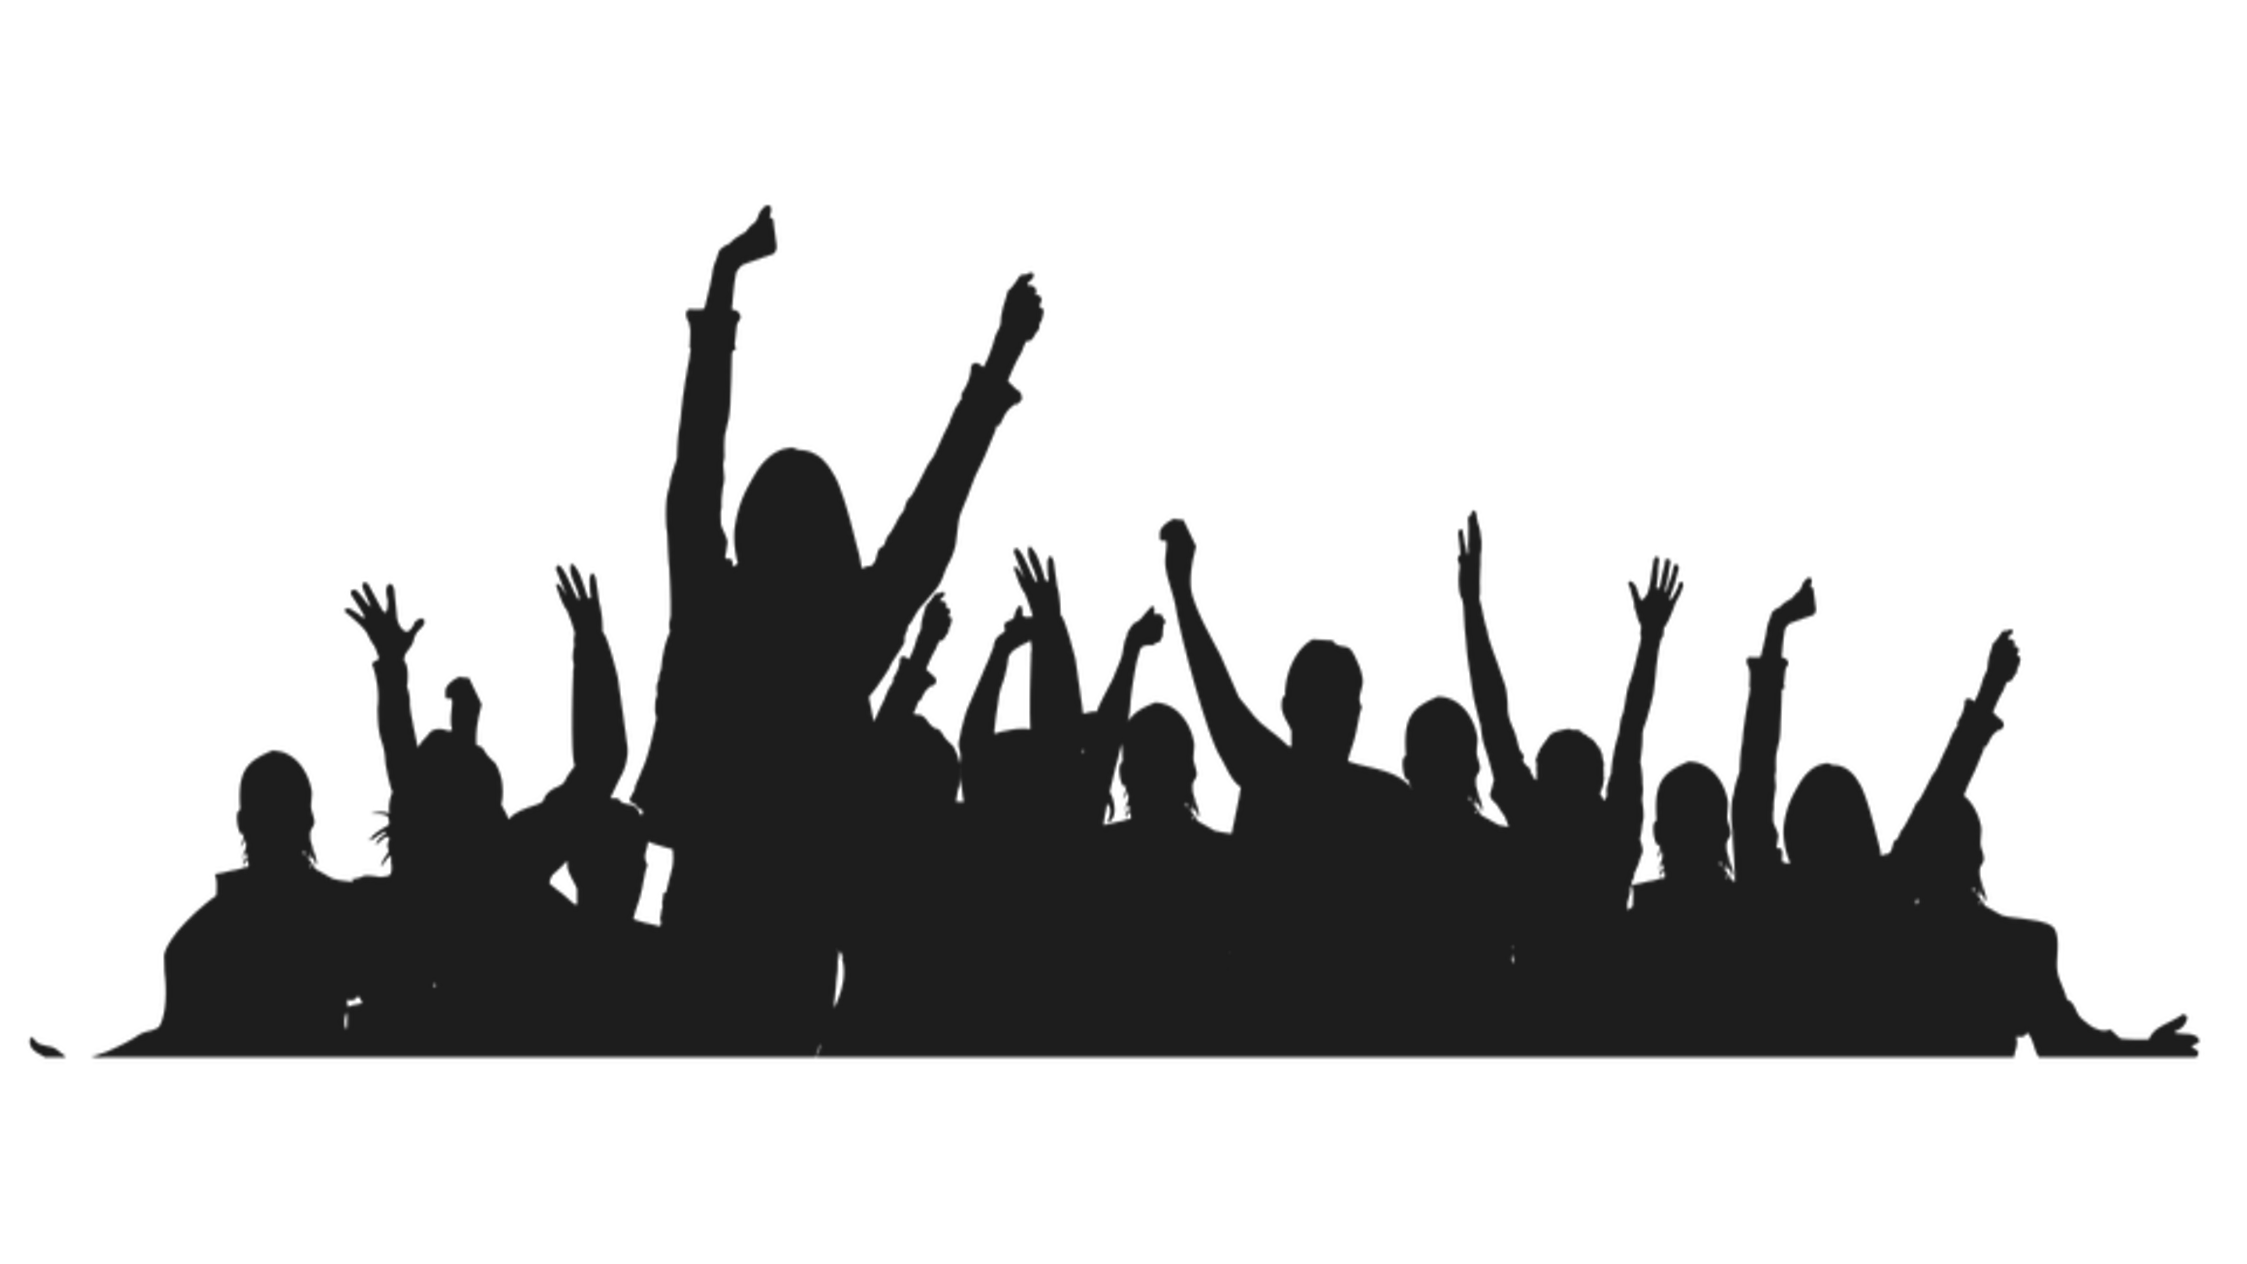 Crowd clipart movie audience, Crowd movie audience Transparent FREE for